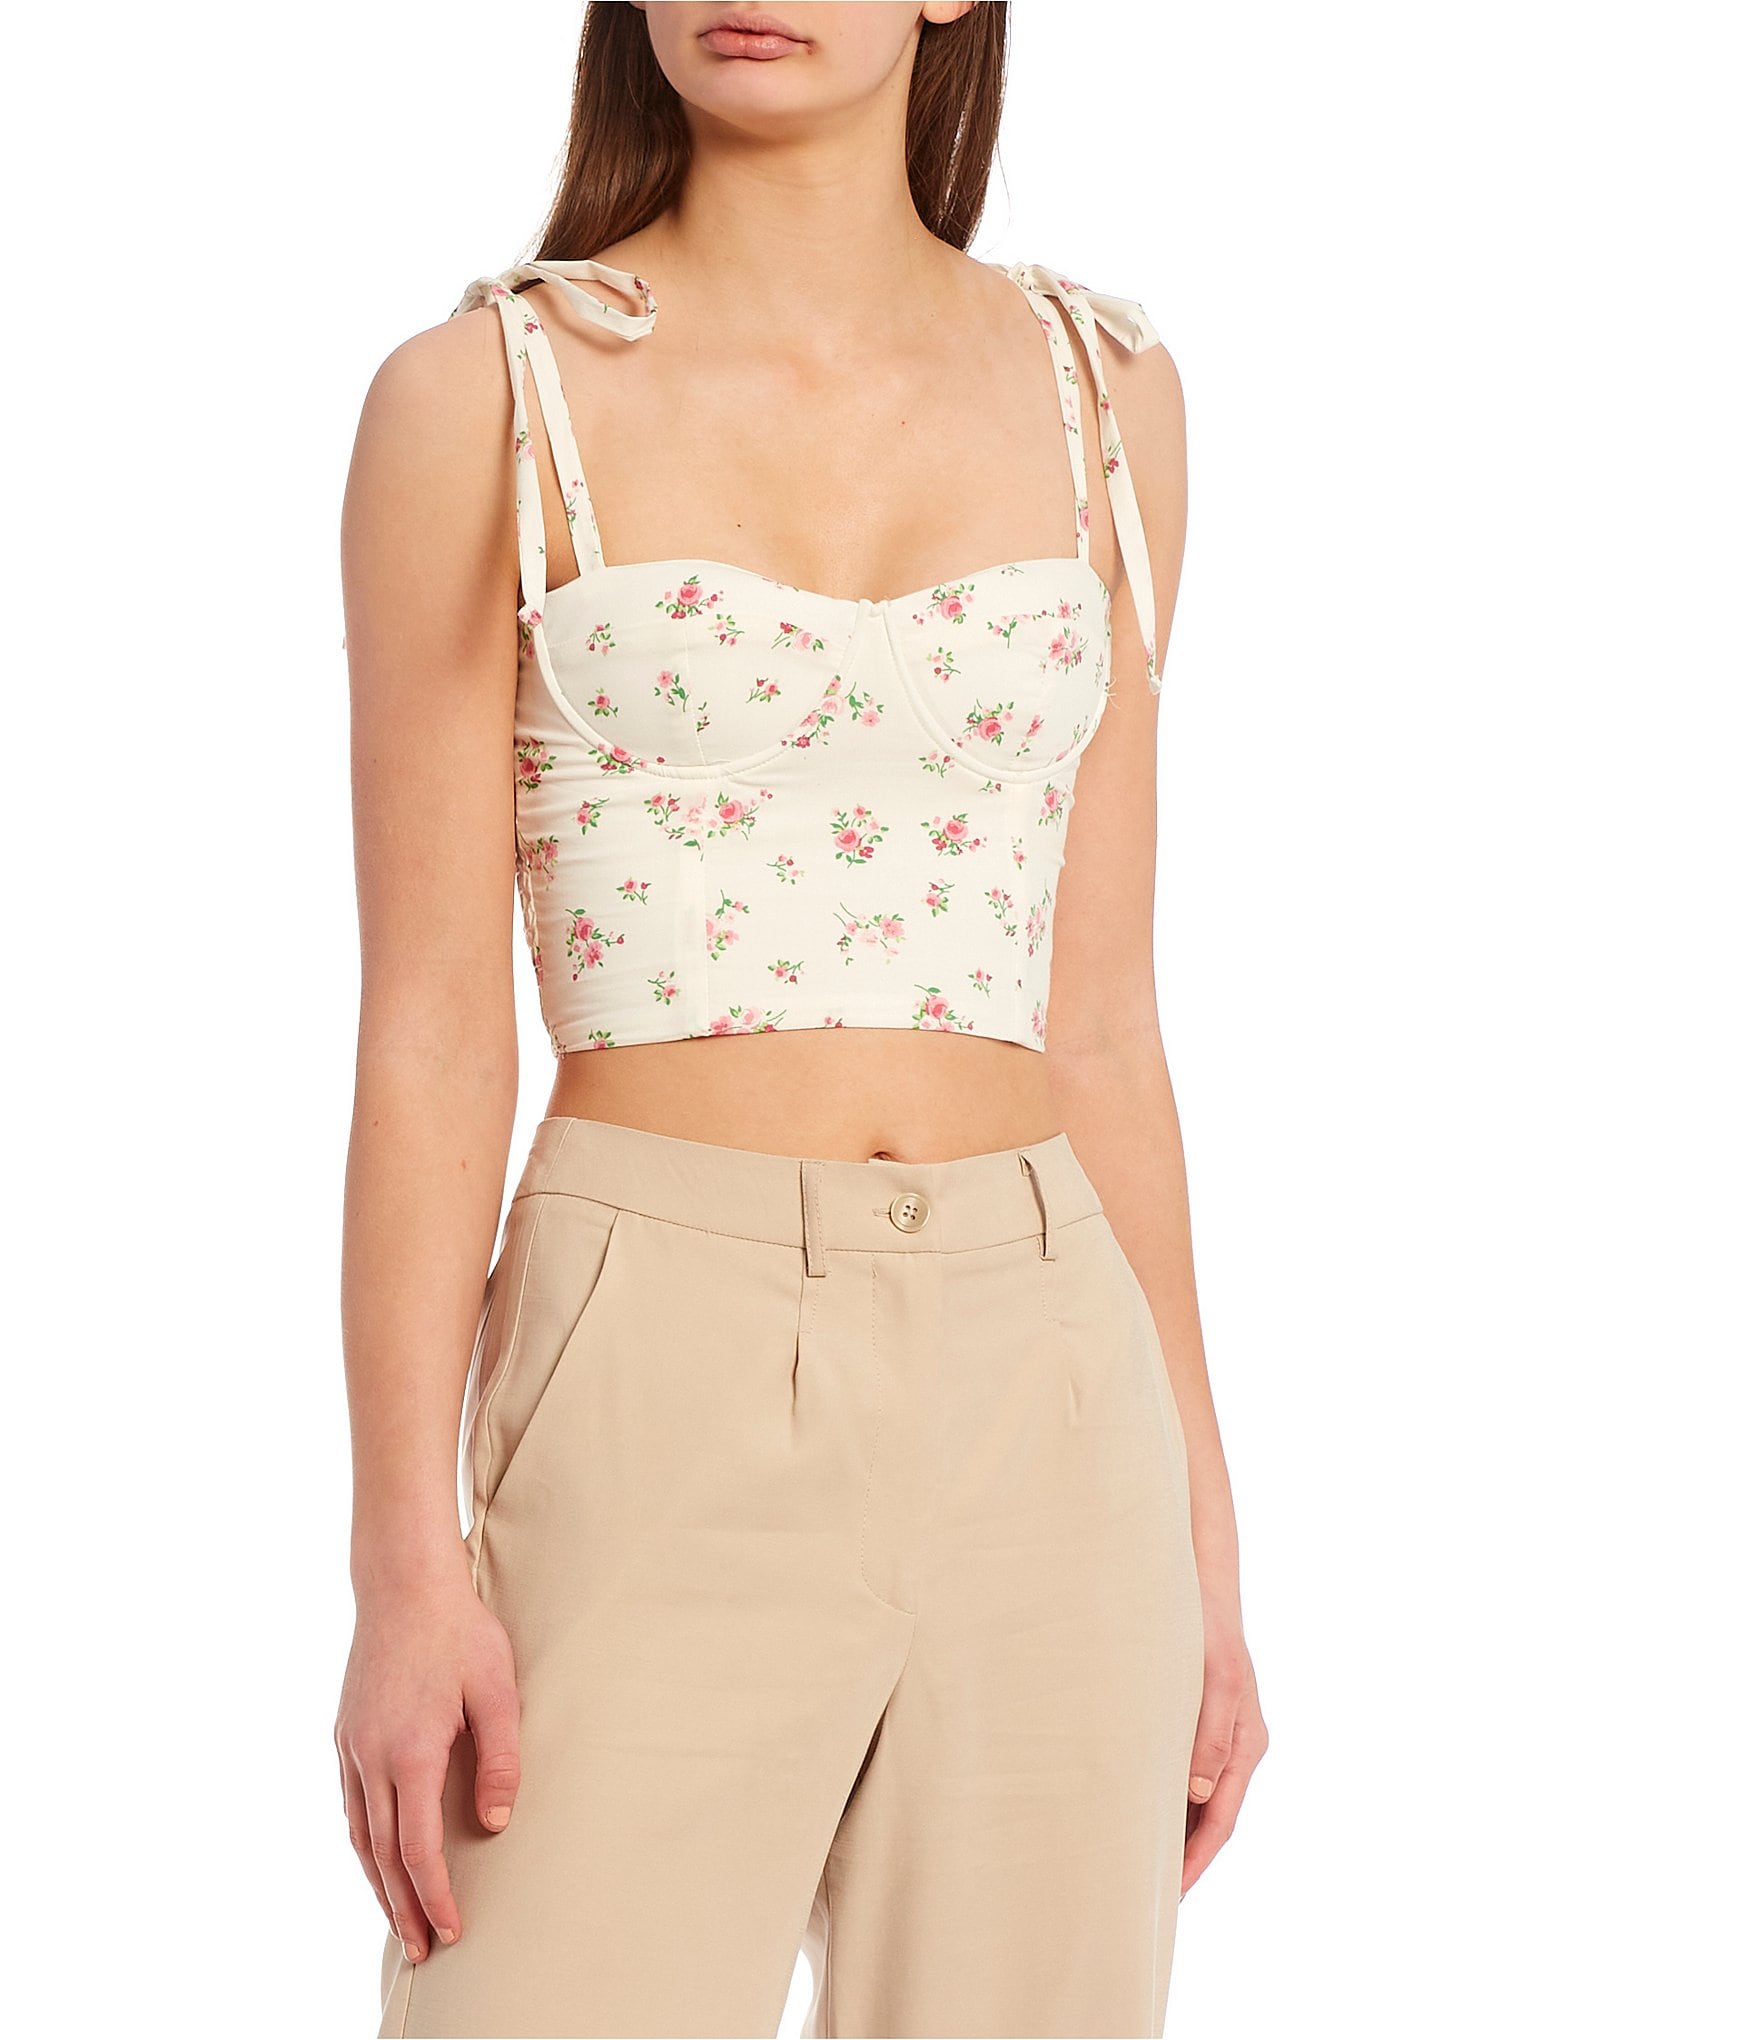 Floral Crop Tops for Women